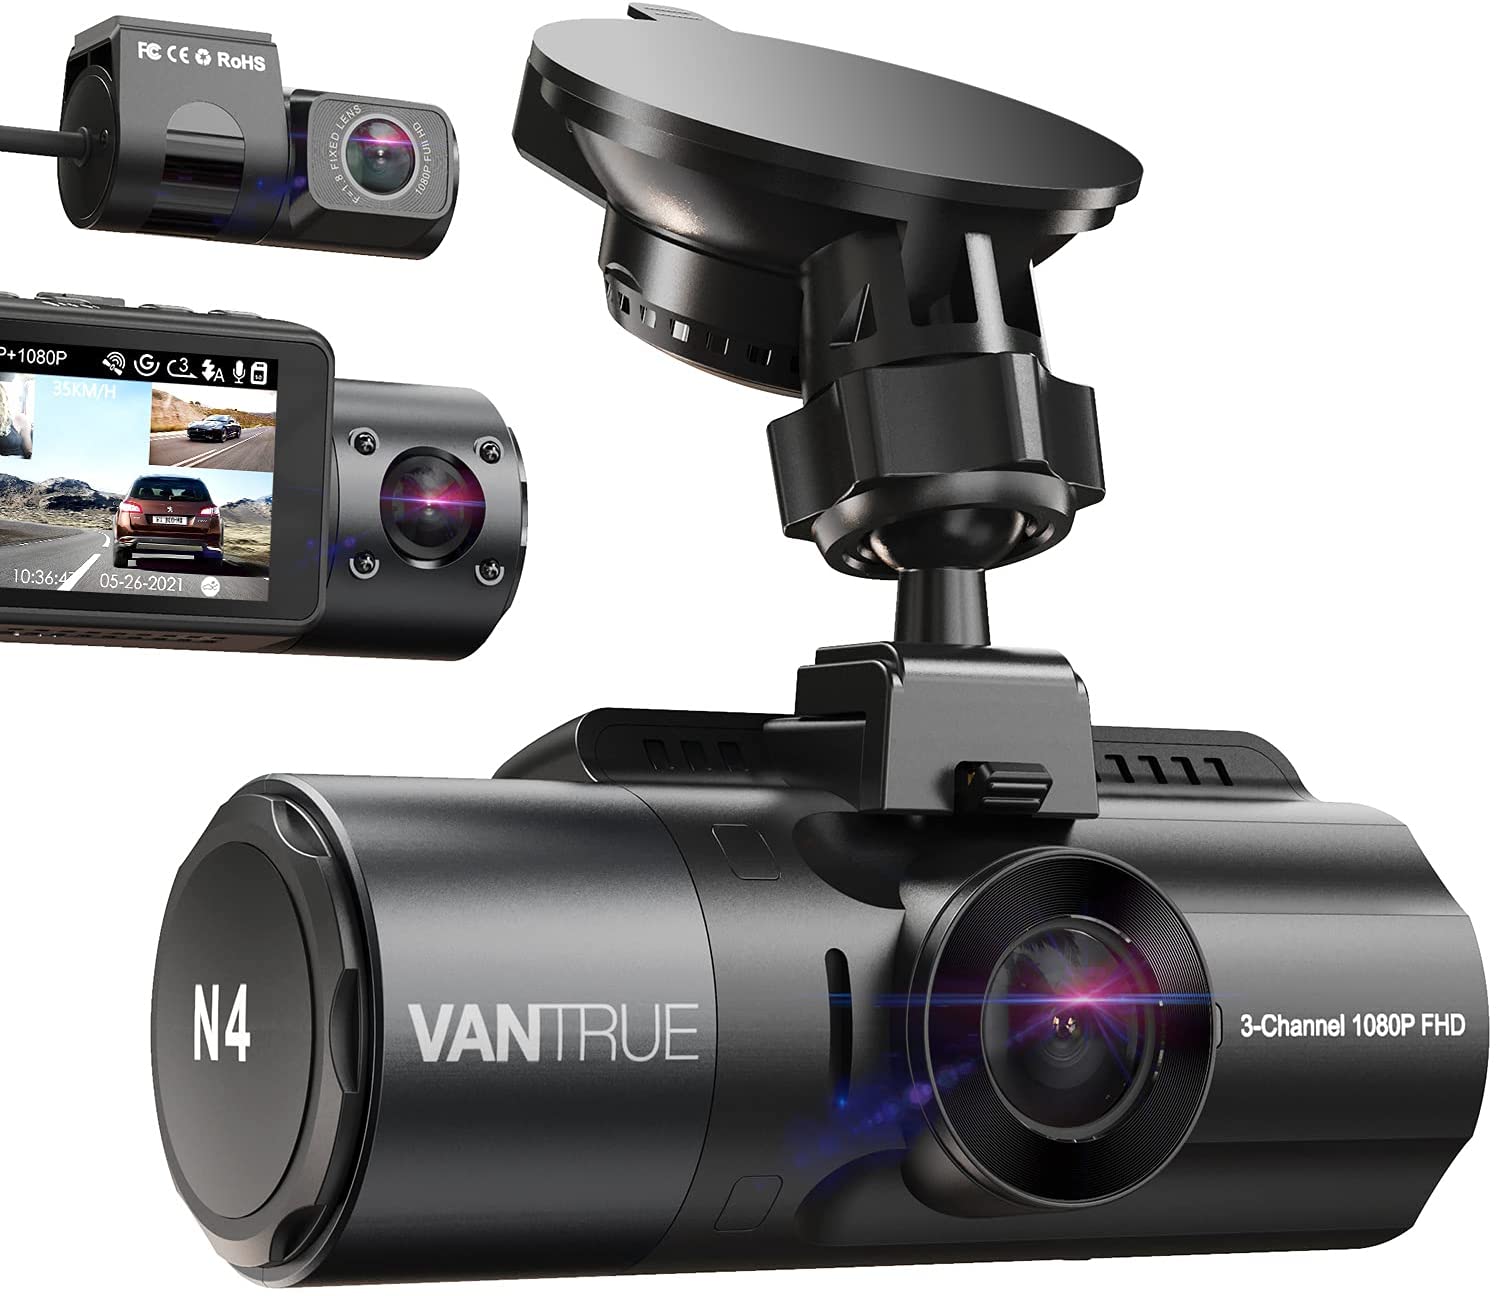 Best Dash Cams 2021: Why Professional Drivers Should Pick the Nexar Pro